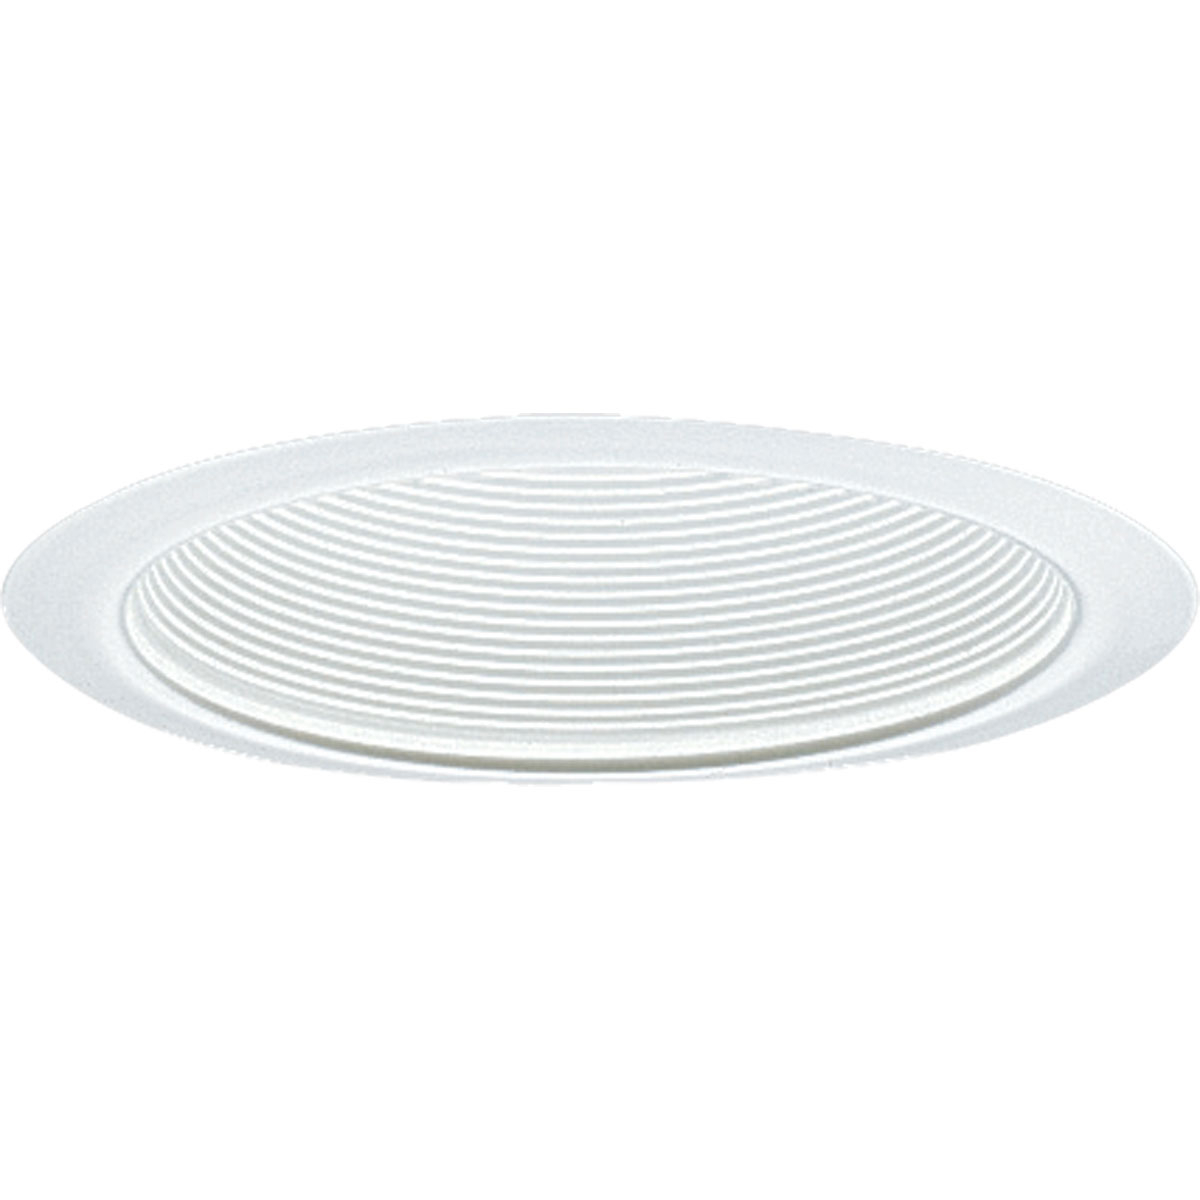 6 in Step Baffle for shallow housing in White finish with bright white powder painted flange. For insulated ceilings. 7-3/4 in outside diameter.